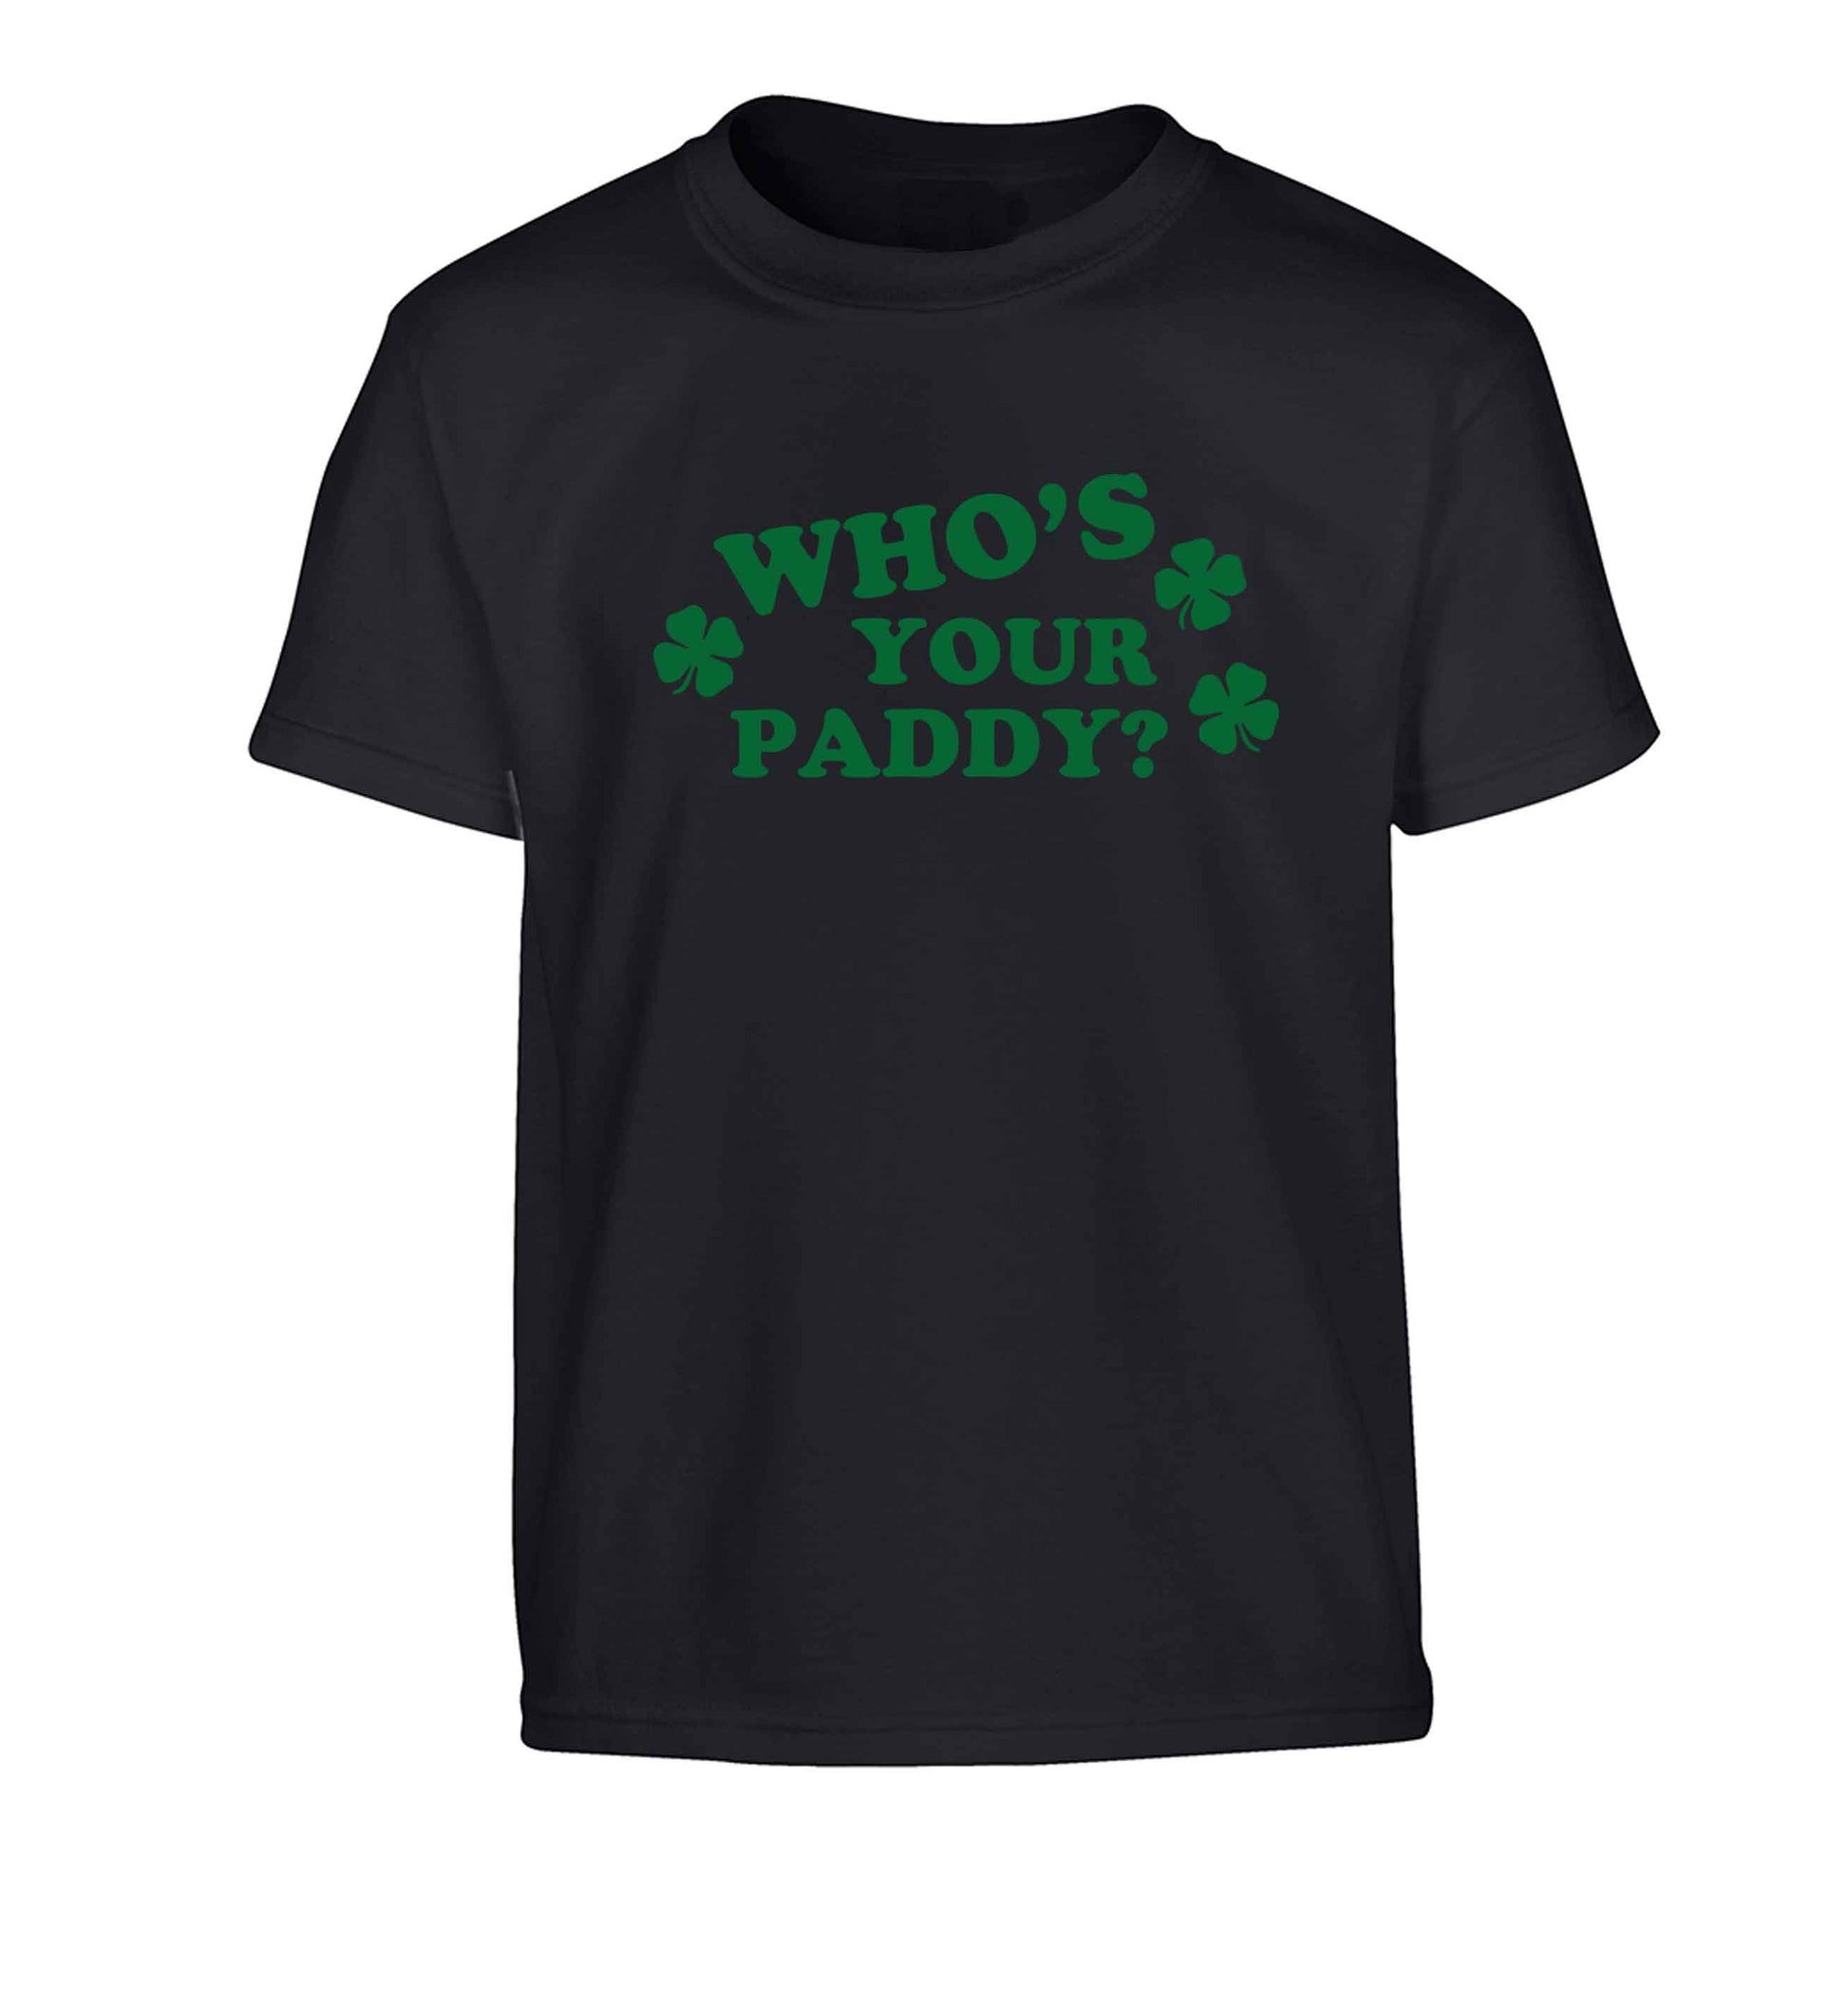 Who's your paddy? Children's black Tshirt 12-13 Years